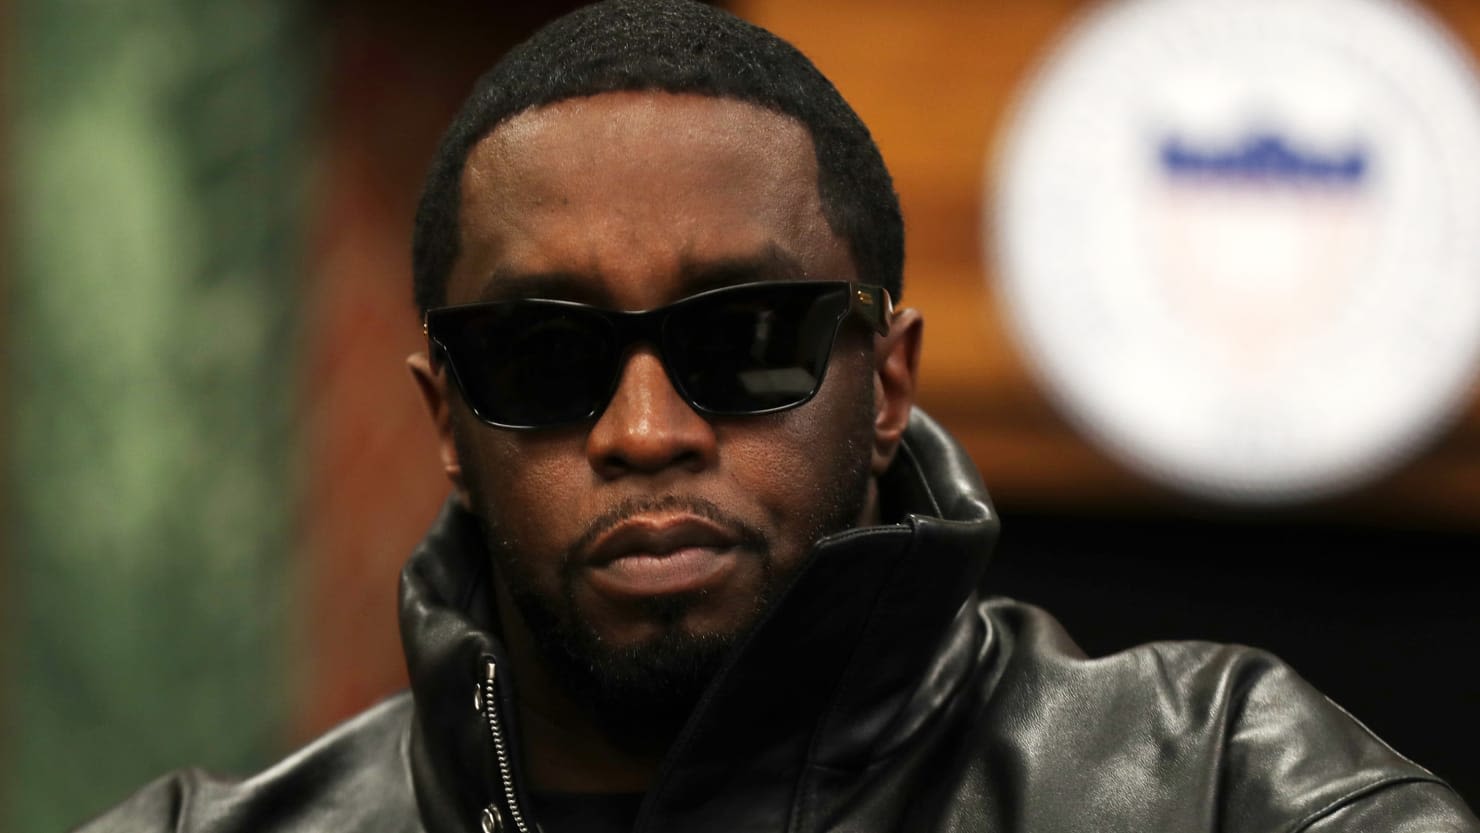 Sean ‘Diddy’ Combs Is ‘Incensed’ About Cassie Video, Report Claims